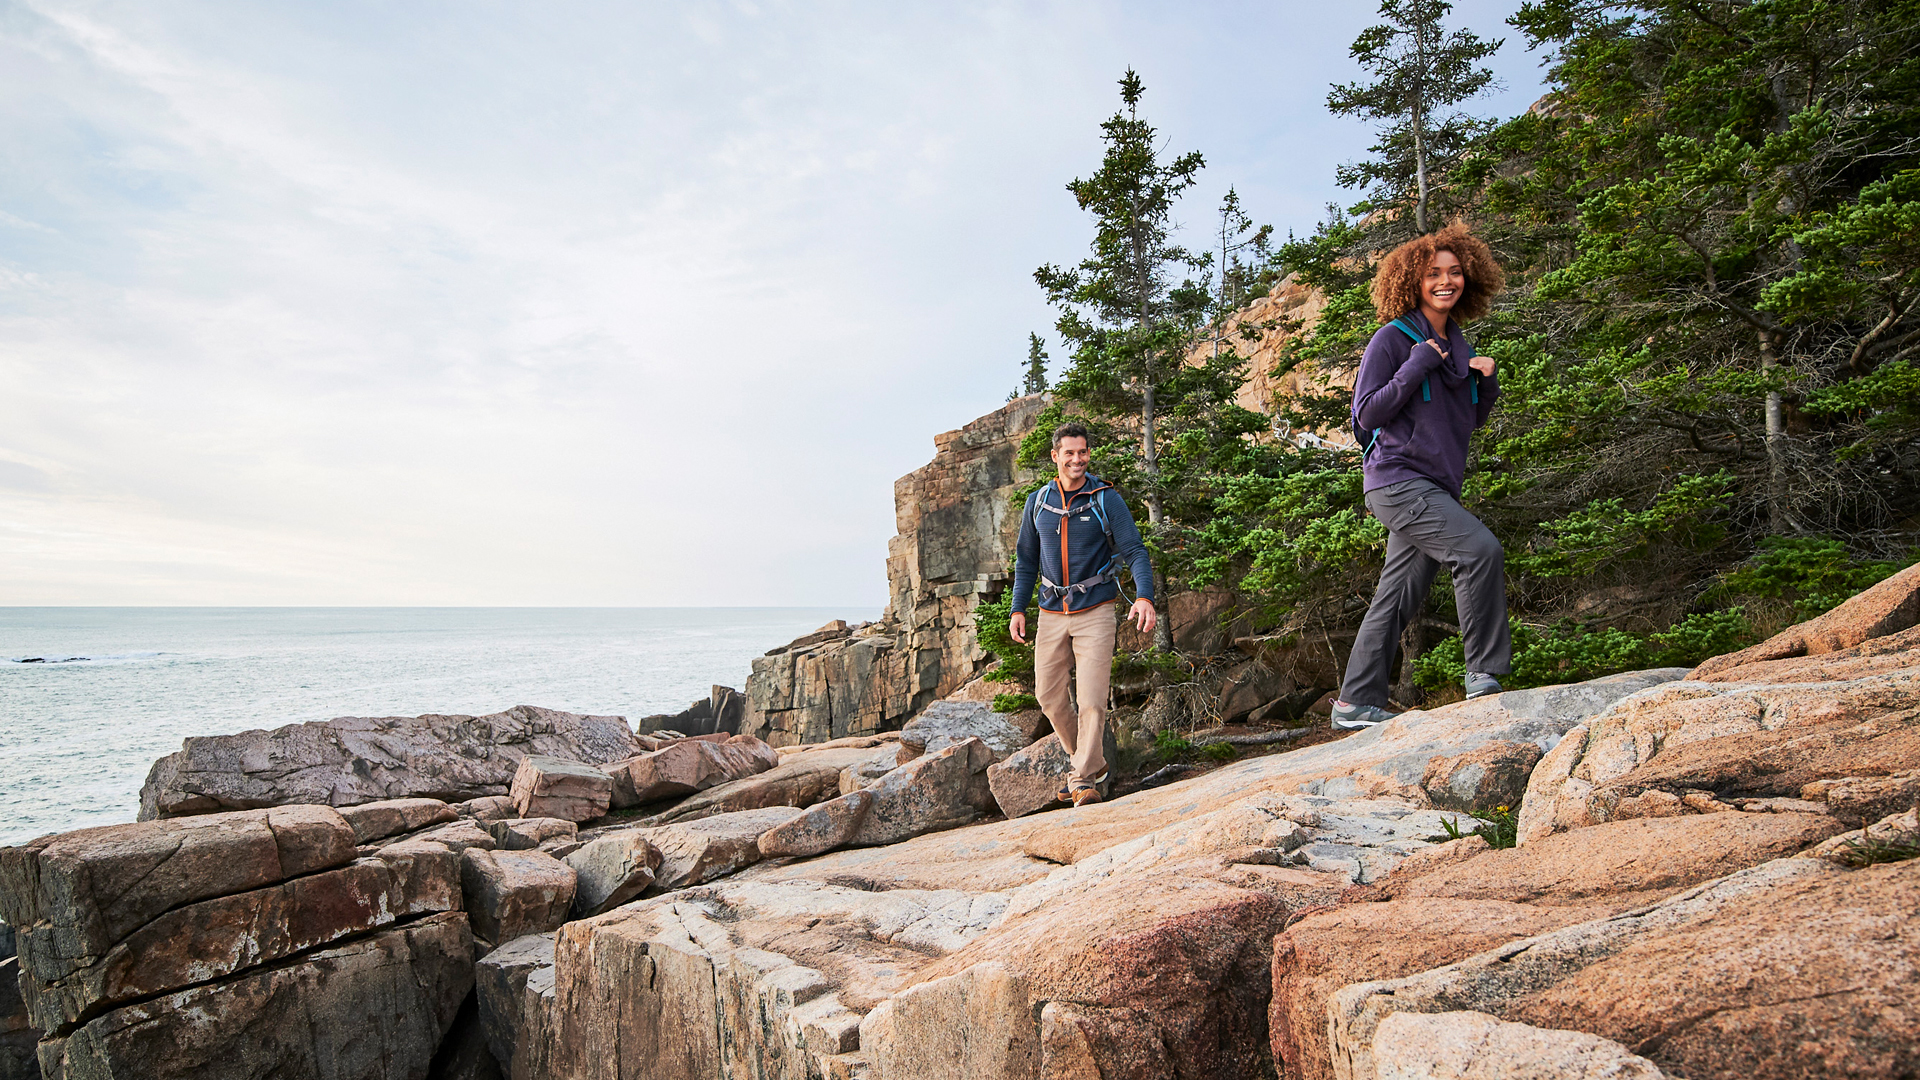 A Perfectly Natural Partnership with L.L.Bean